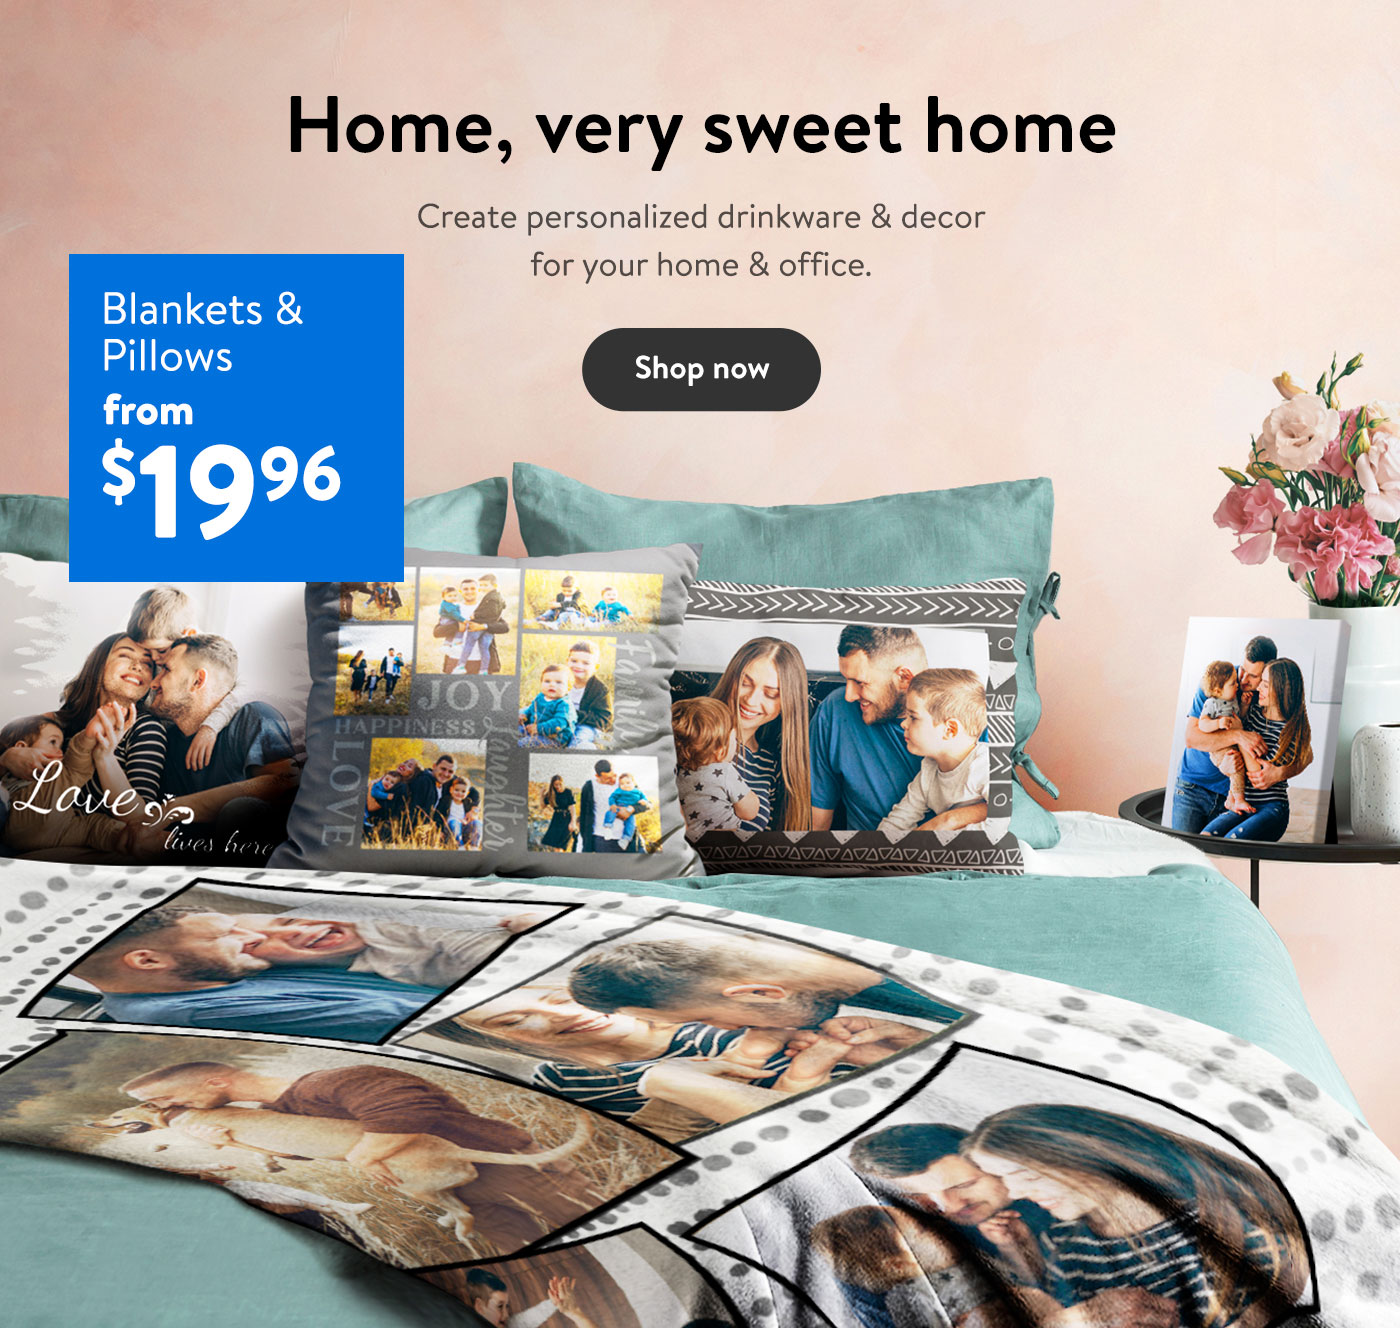 Home, very sweet home - Blankets and Pillows from $19.96